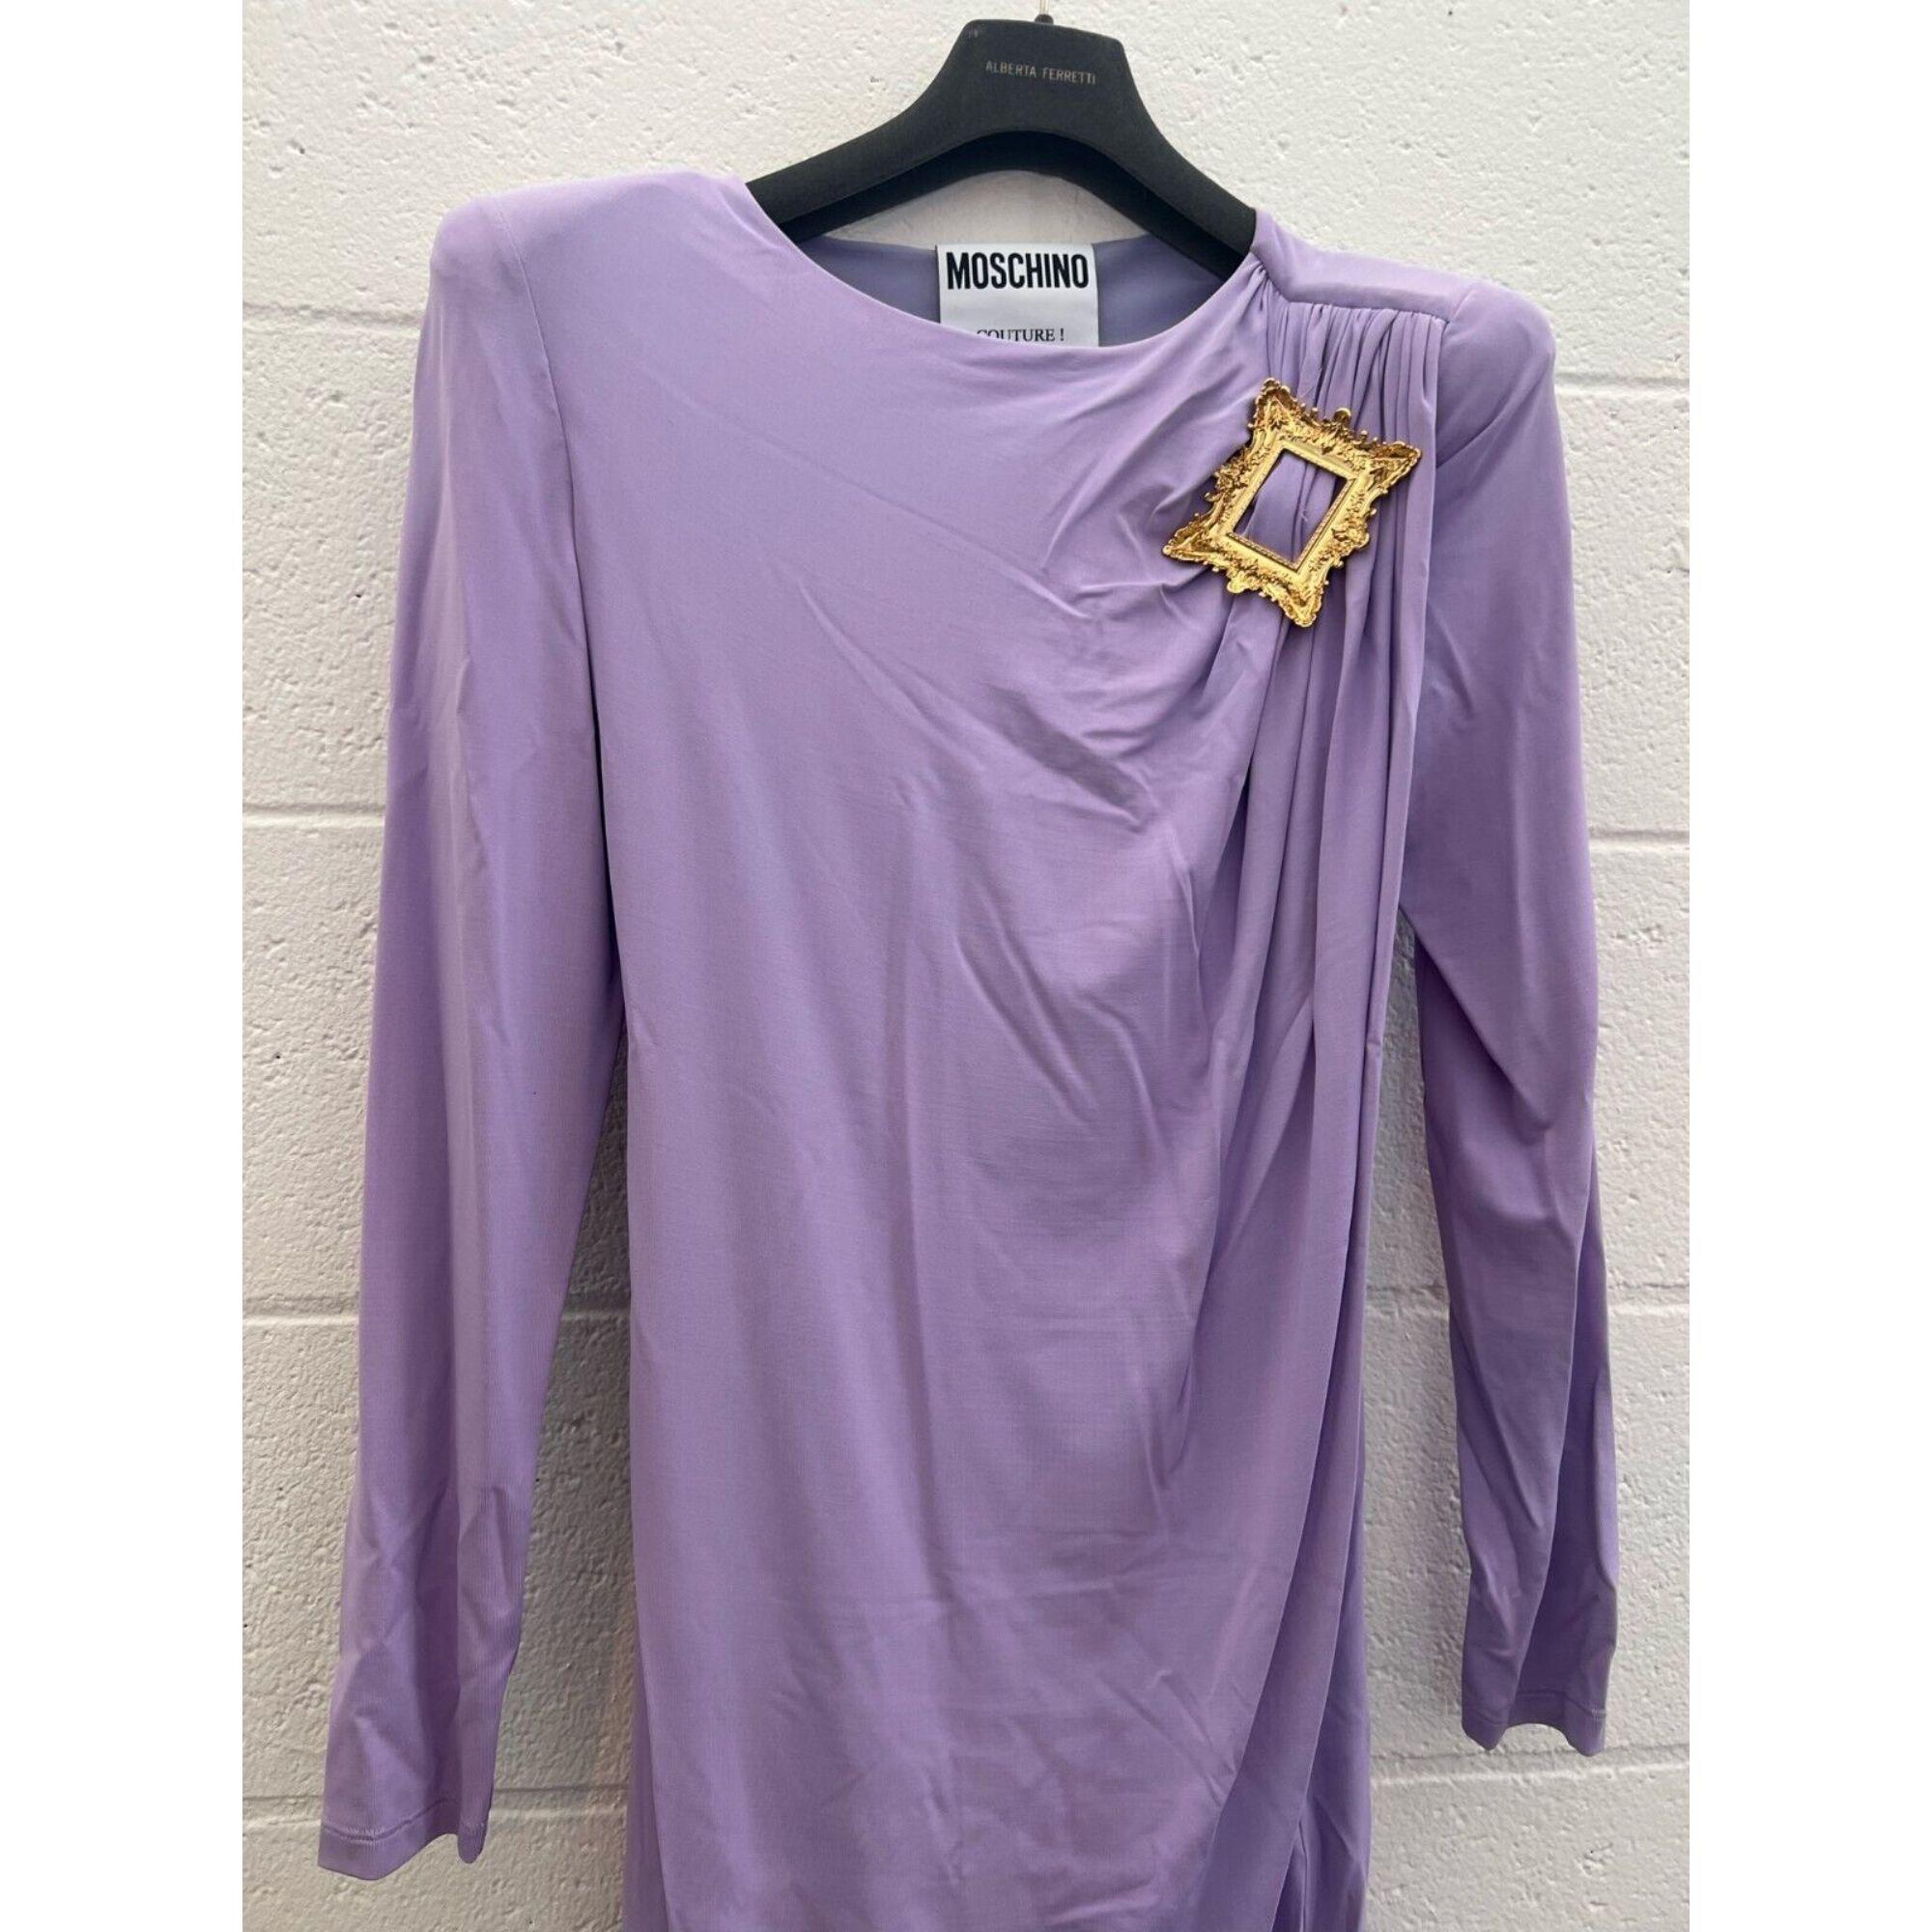 SS20 Moschino Couture Jeremy Scott Violet Picasso Painting Frame Viscose Dress

Additional Information:
Material: 91% Viscose, 9% EA, 100% PA Lining
Color: Violet
Size: IT 46 / US 12
Pattern: Solid
Style: Bodycon, Knee Length
Dimensions:  Bust